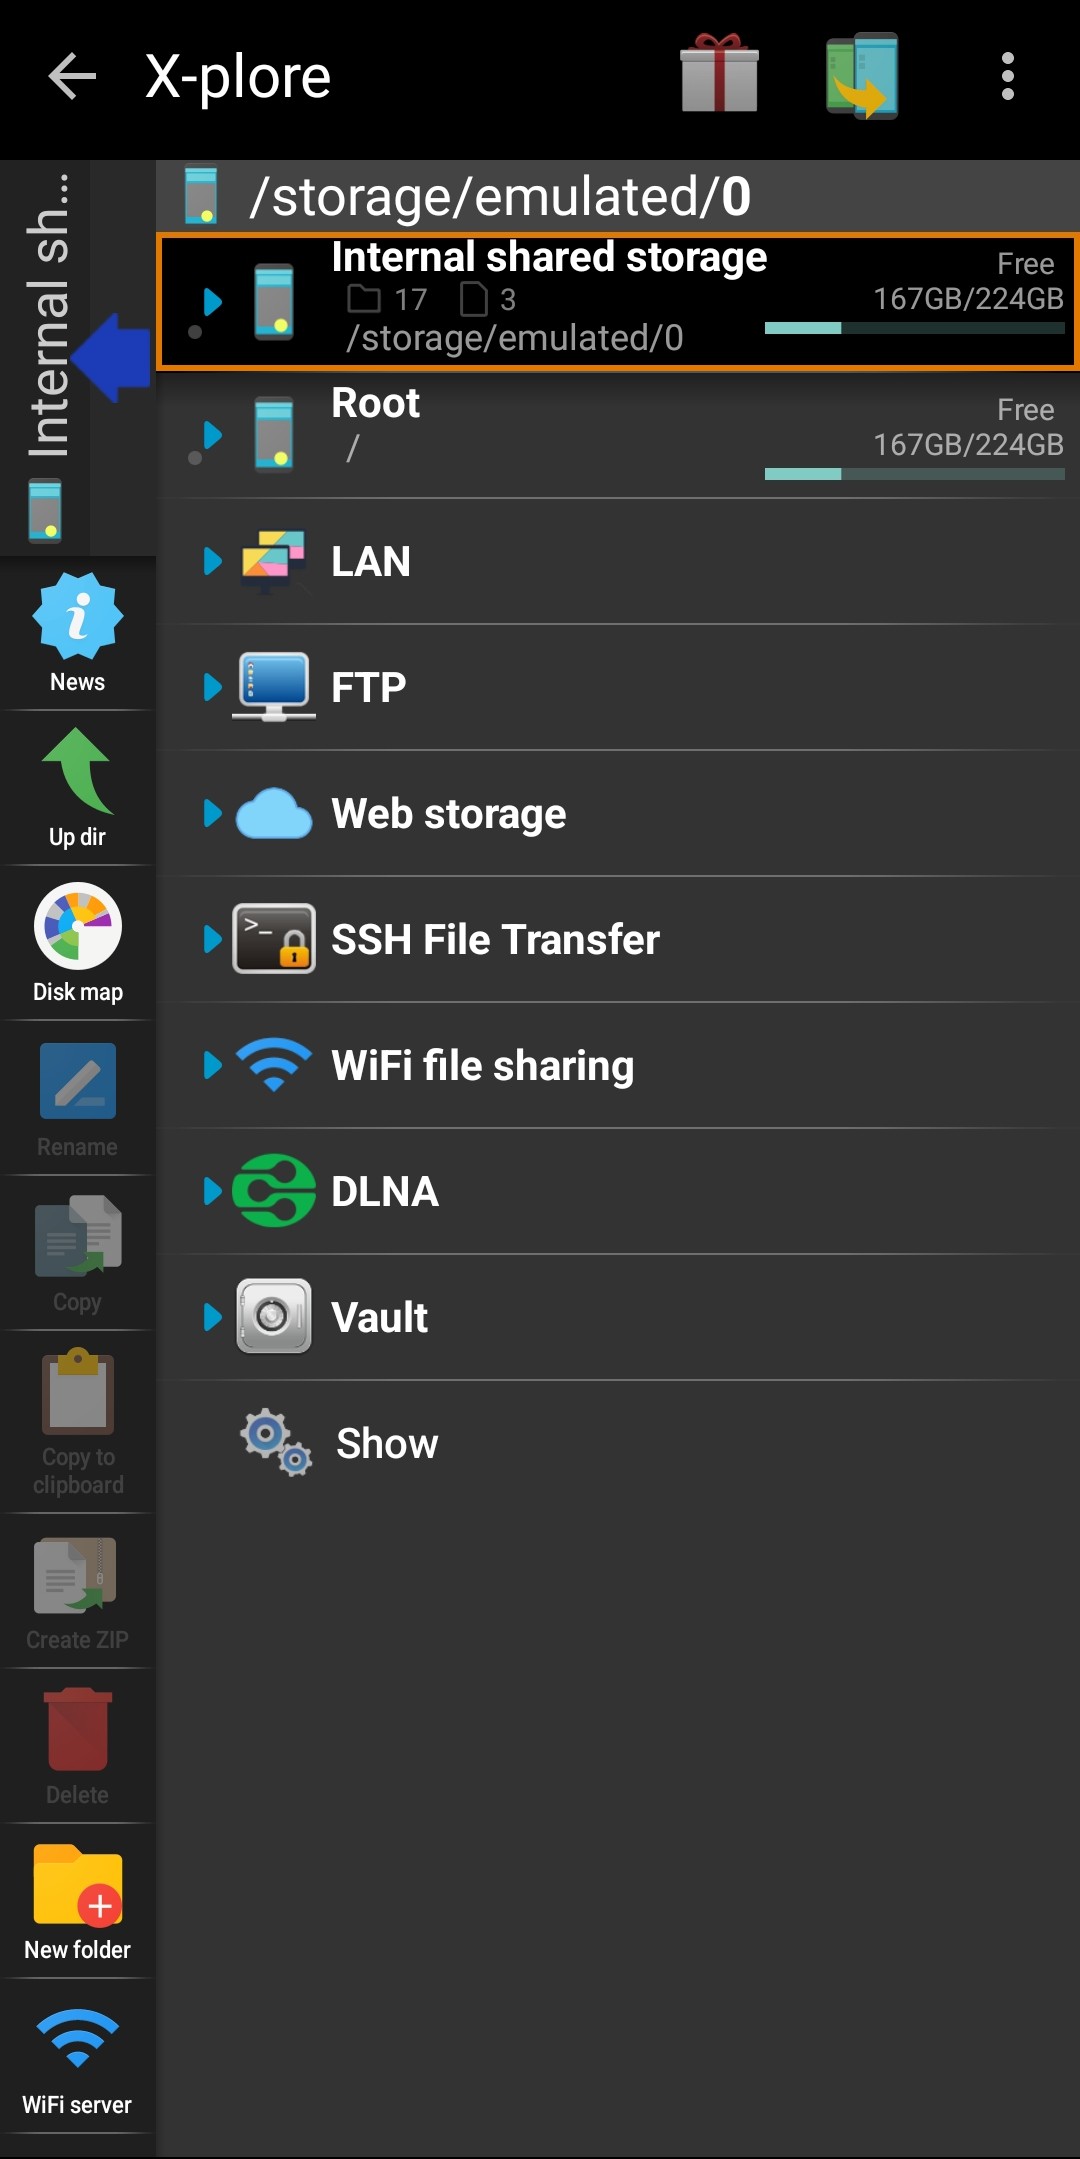 UI of X-plore File Manager.